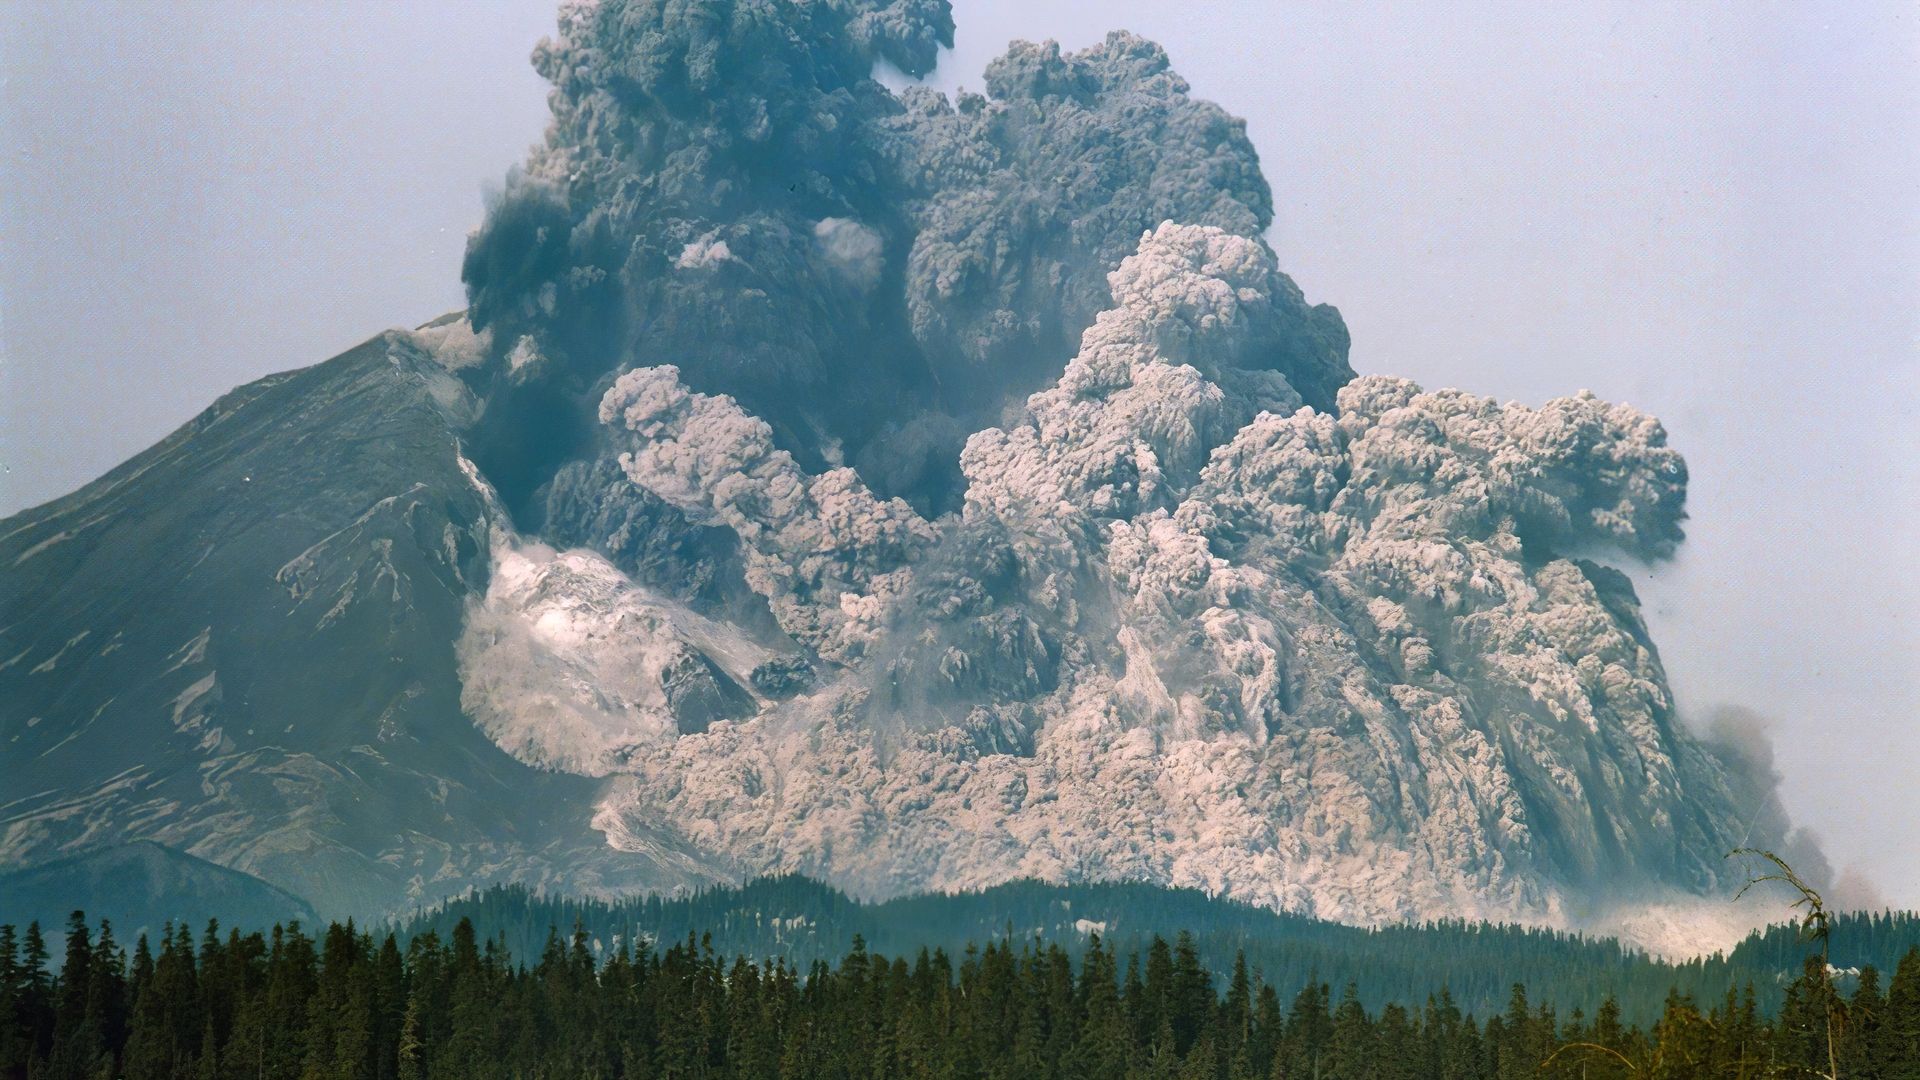 Surviving the Mount St. Helens Disaster background